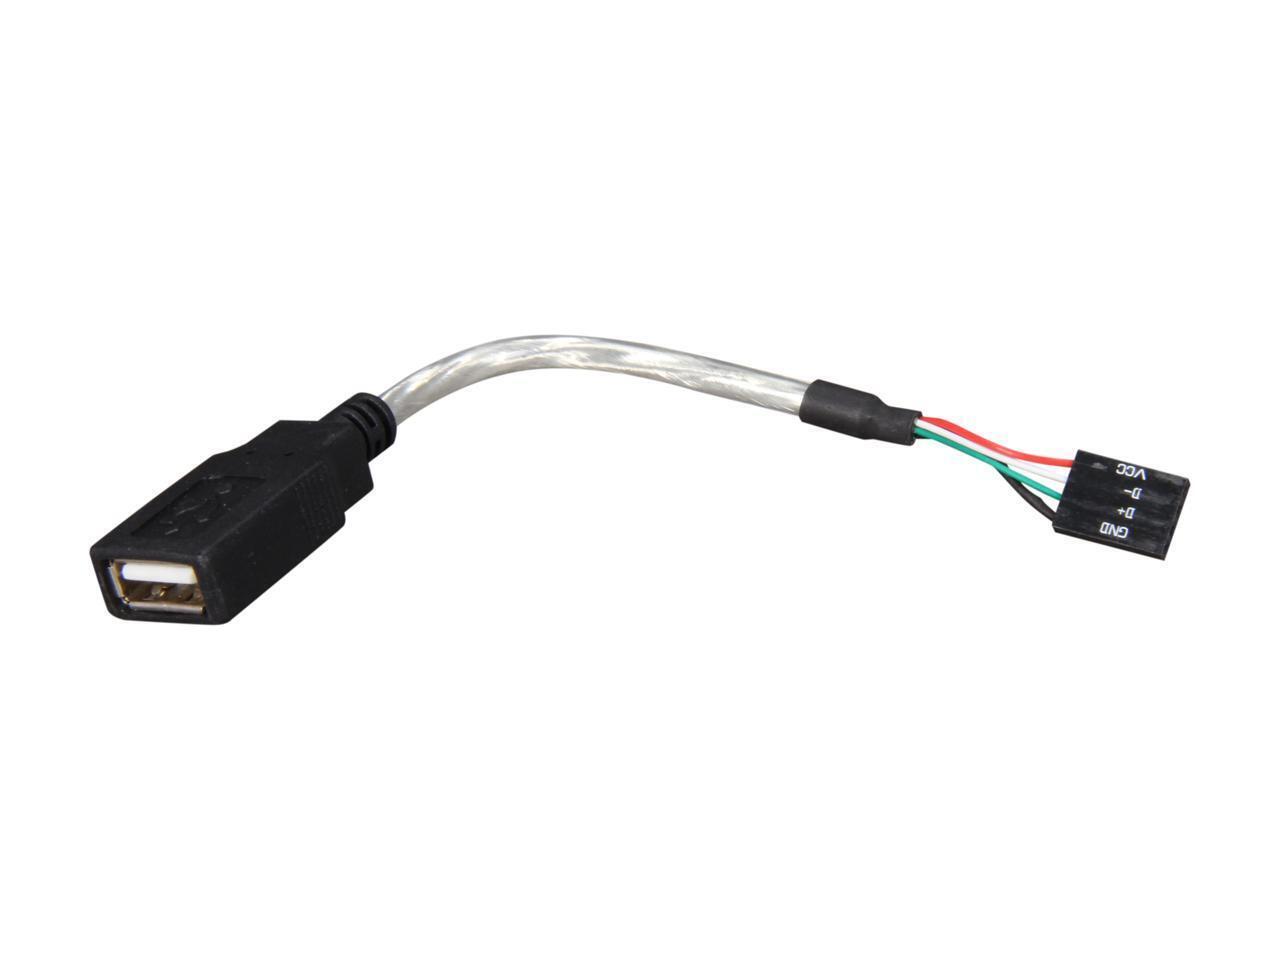 StarTech.com USBMBADAPT 6in USB 2.0 Cable - USB A Female to USB Motherboard 4